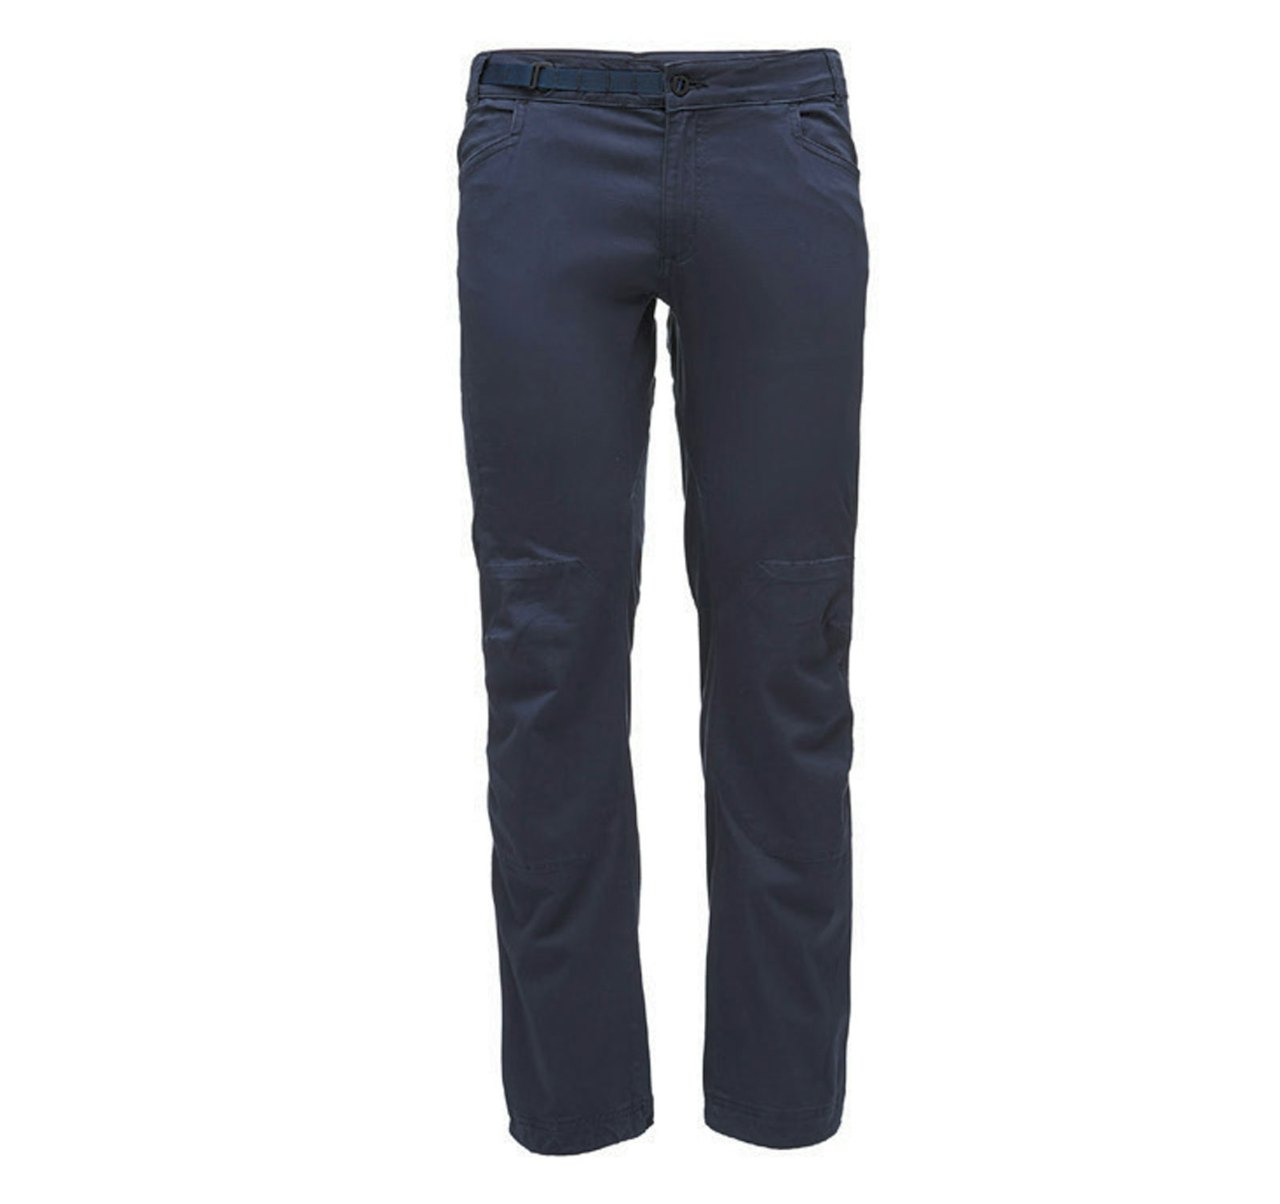 Rab Off-width jeans